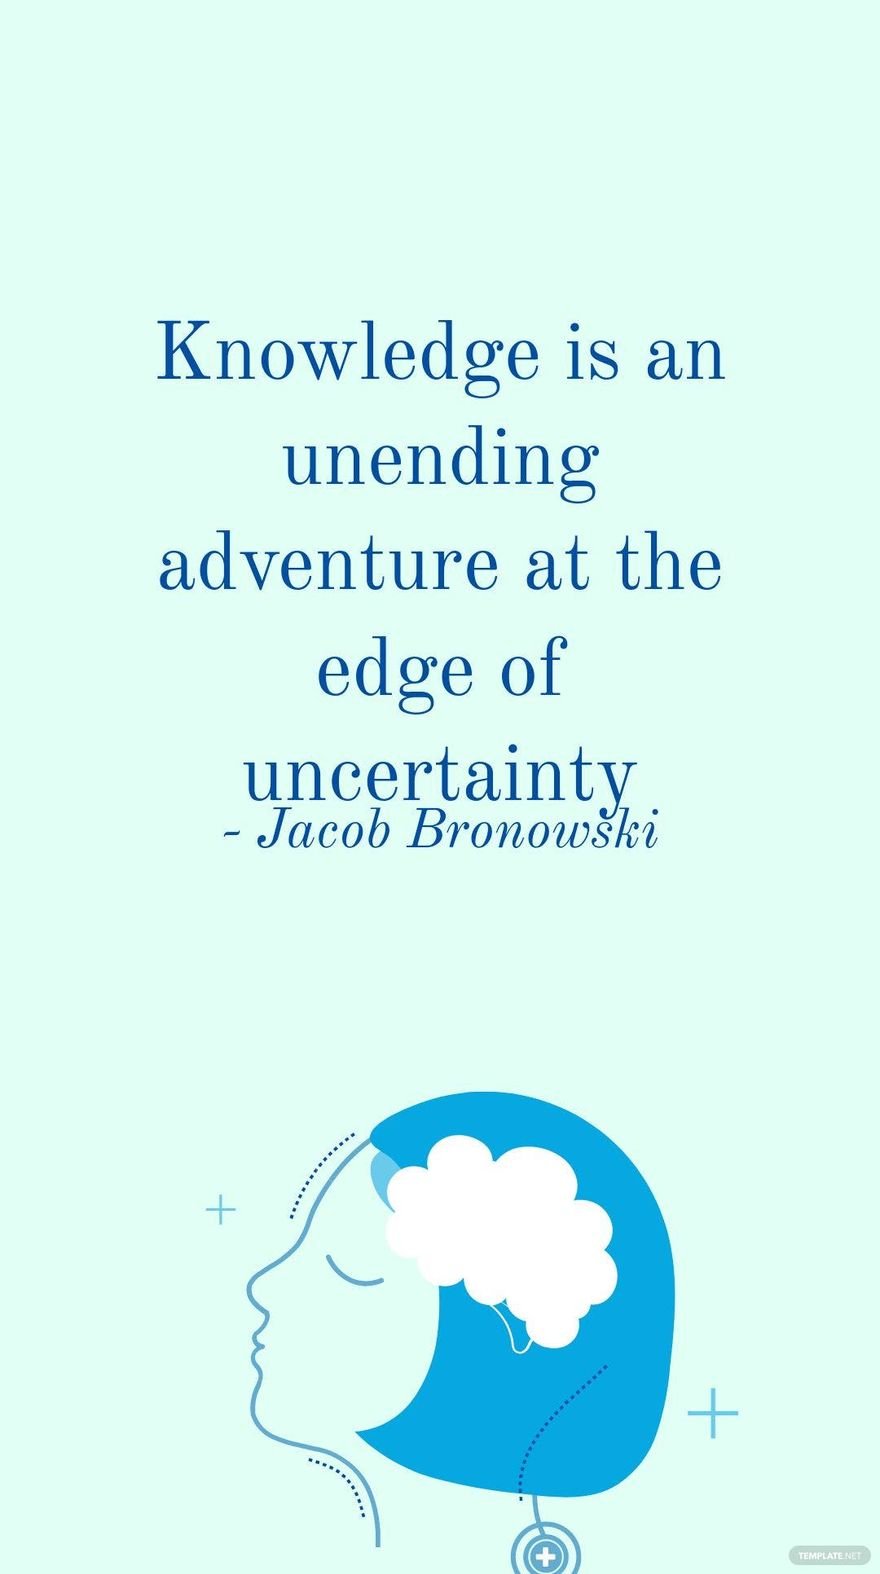 Jacob Bronowski - Knowledge is an unending adventure at the edge of uncertainty in JPG